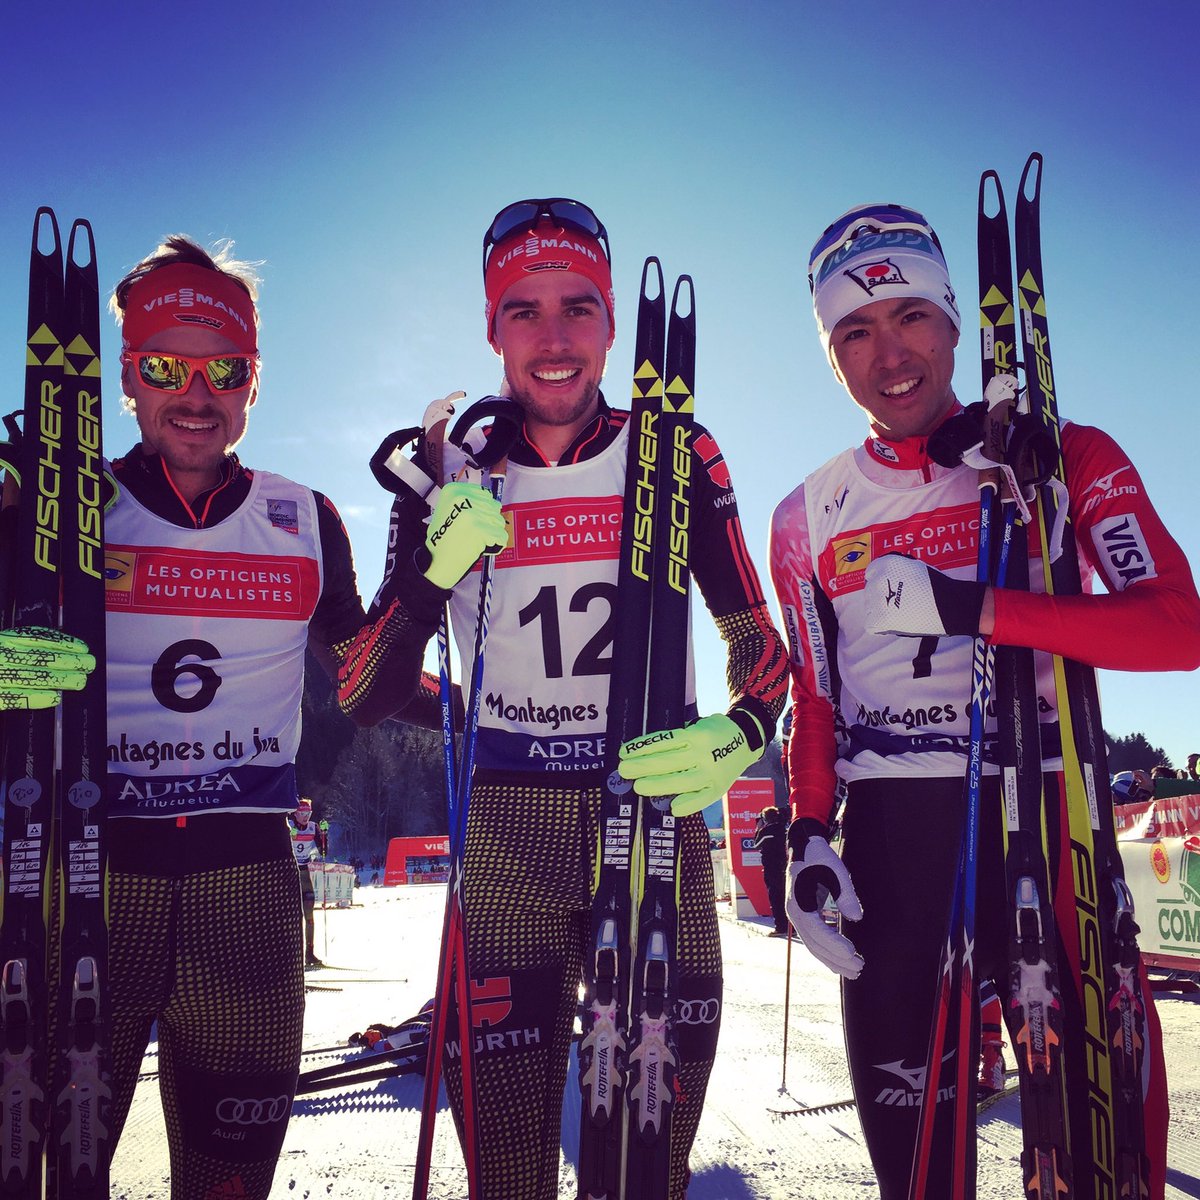 Saturday's Nordic Combined World Cup podium in Chaux-Neuve, France, with German winner Johannes Rydzek (c), German runner-up Fabian Rießle (l) and Japan’s Akito Watabe (r) in third. (Photo: FIS Nordic Combined/Twitter)